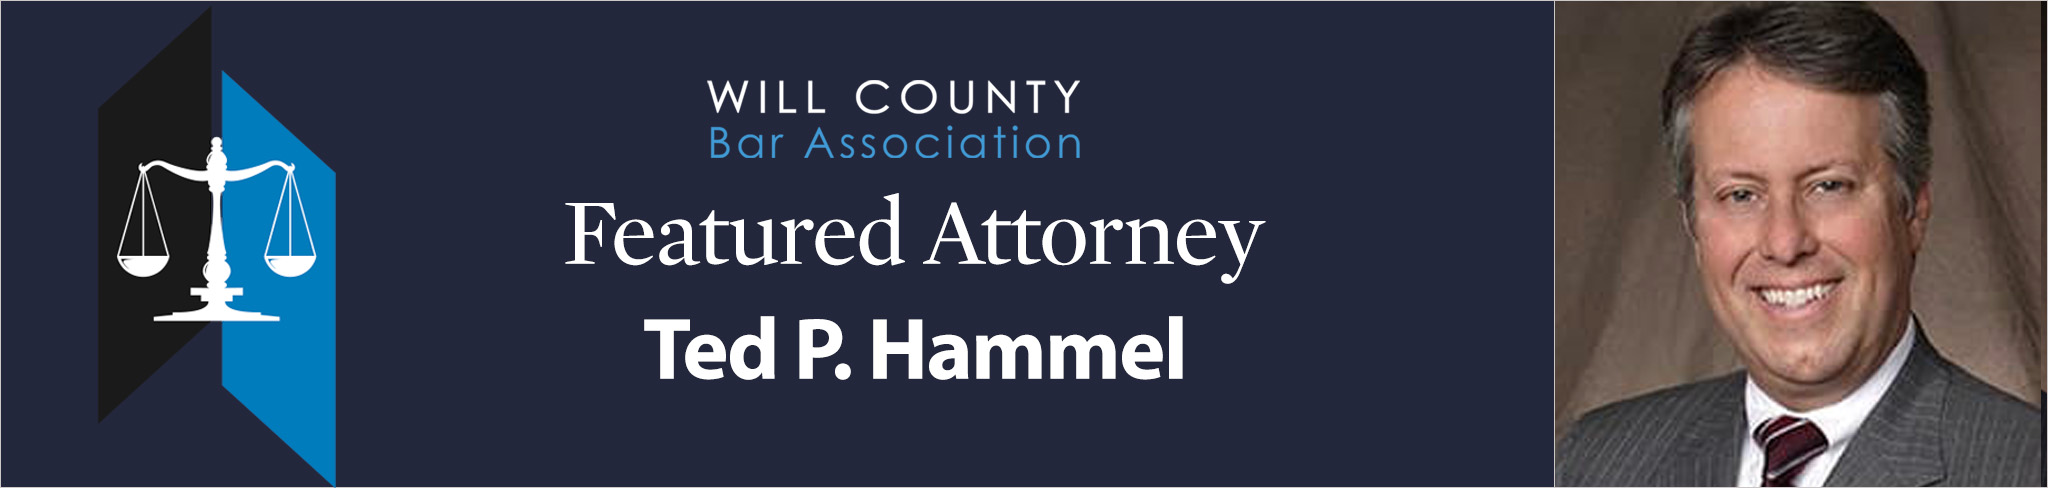 Featured Attorney Ted P. Hammel